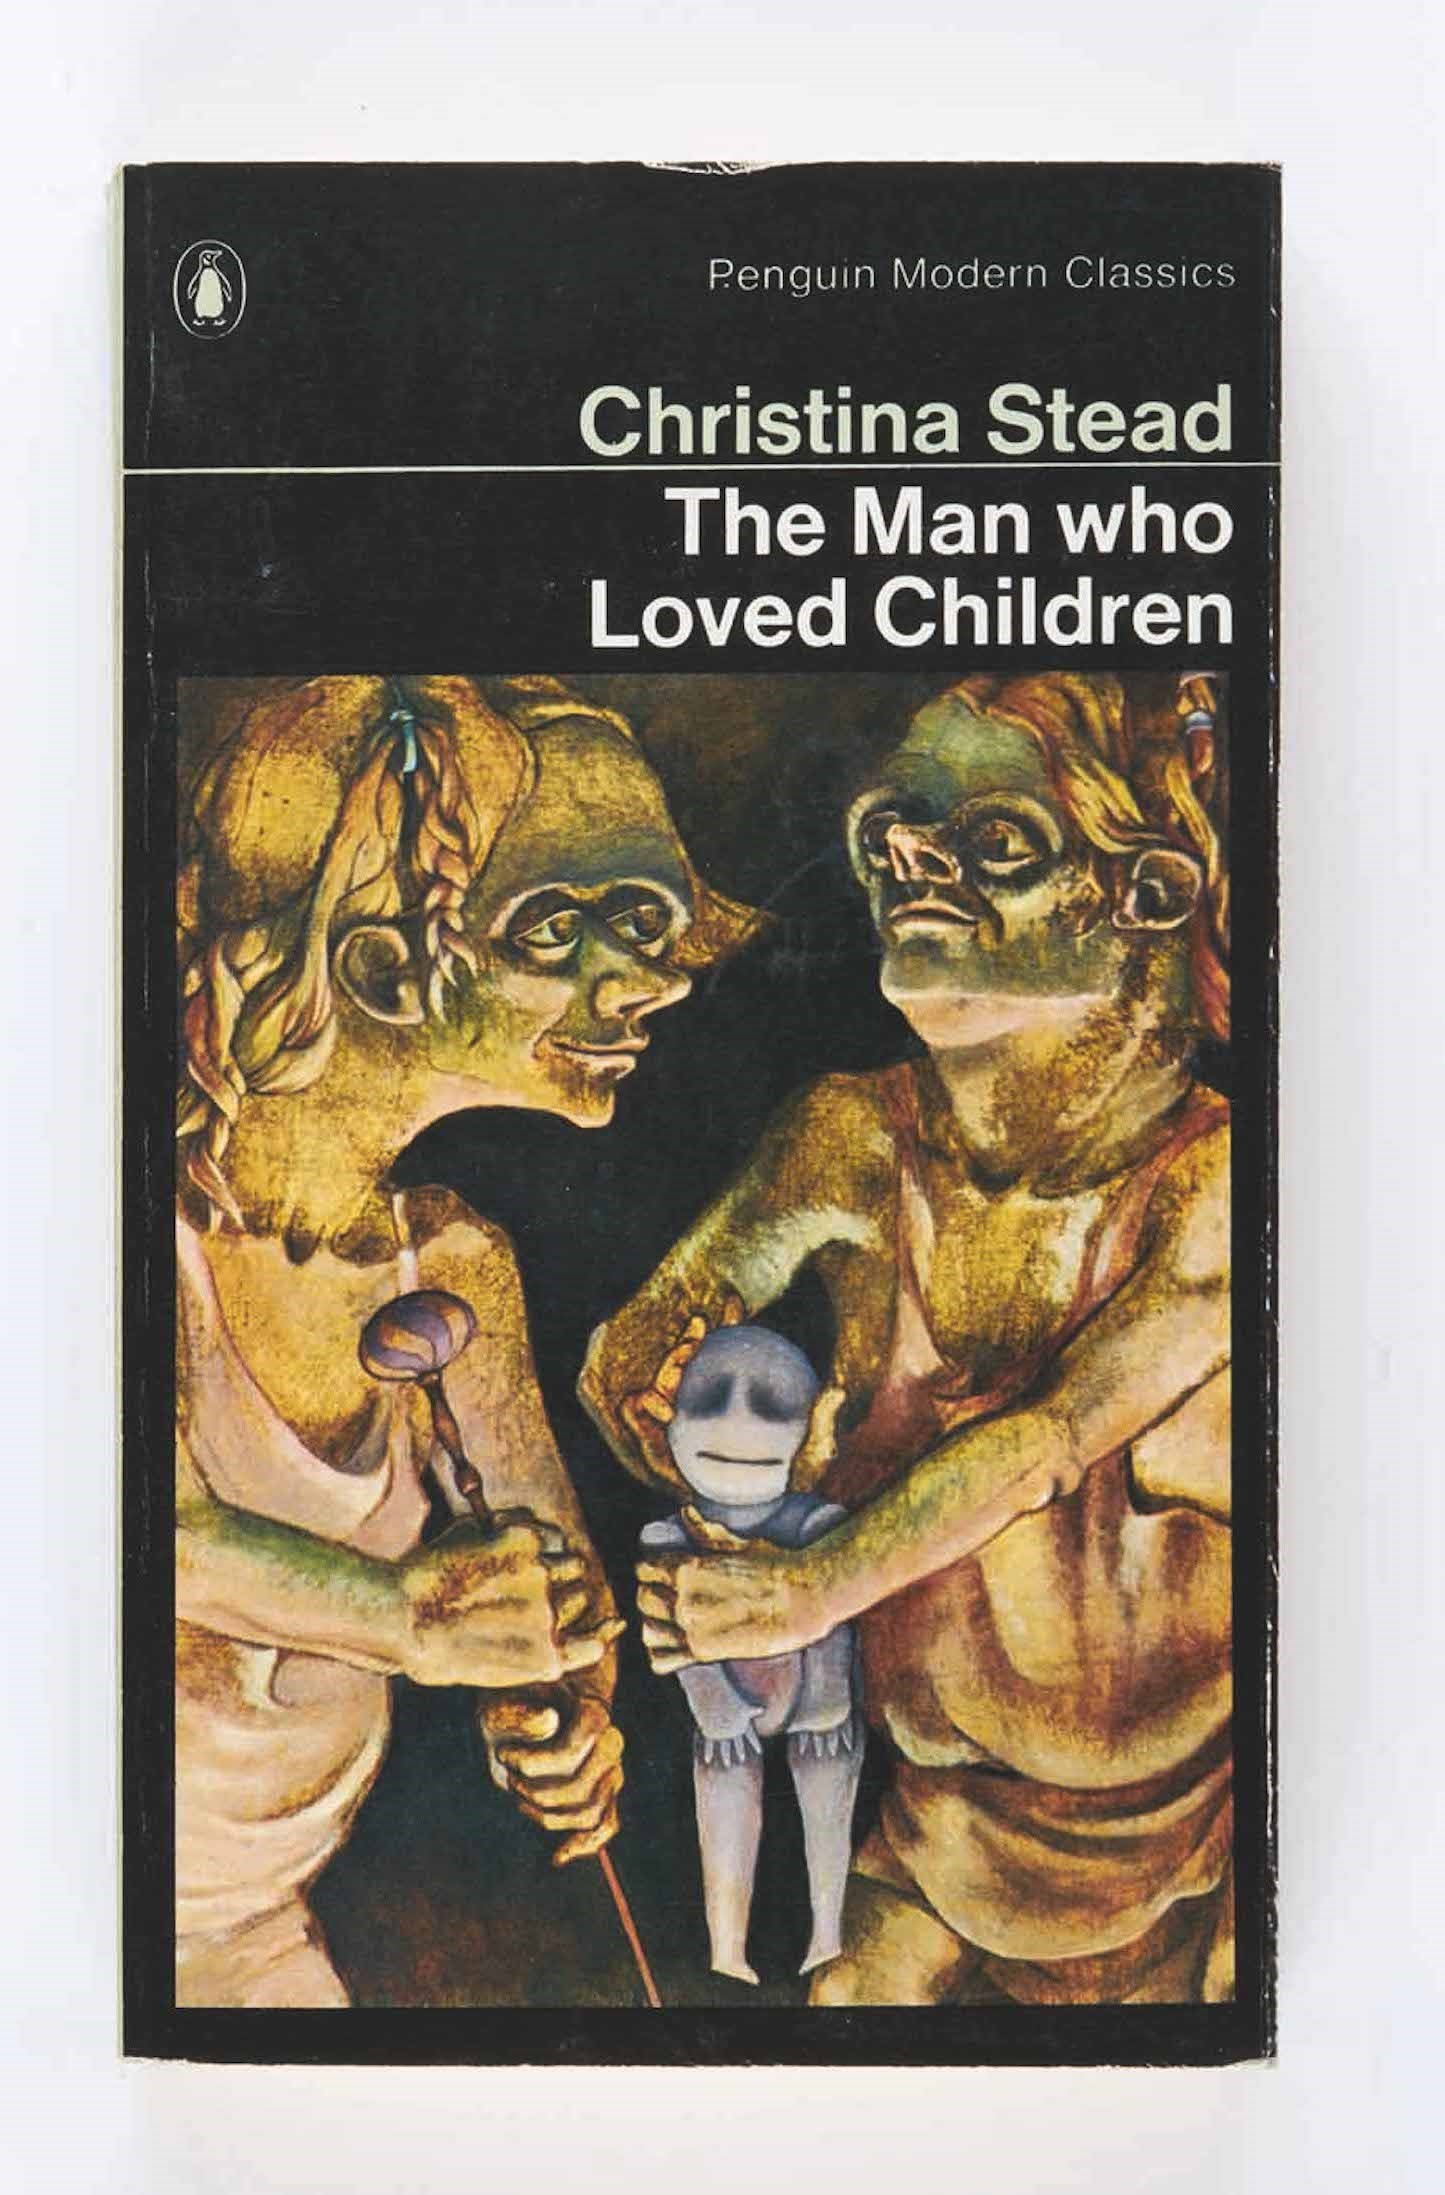 The Man Who Loved Children&#160;by Christina Stead